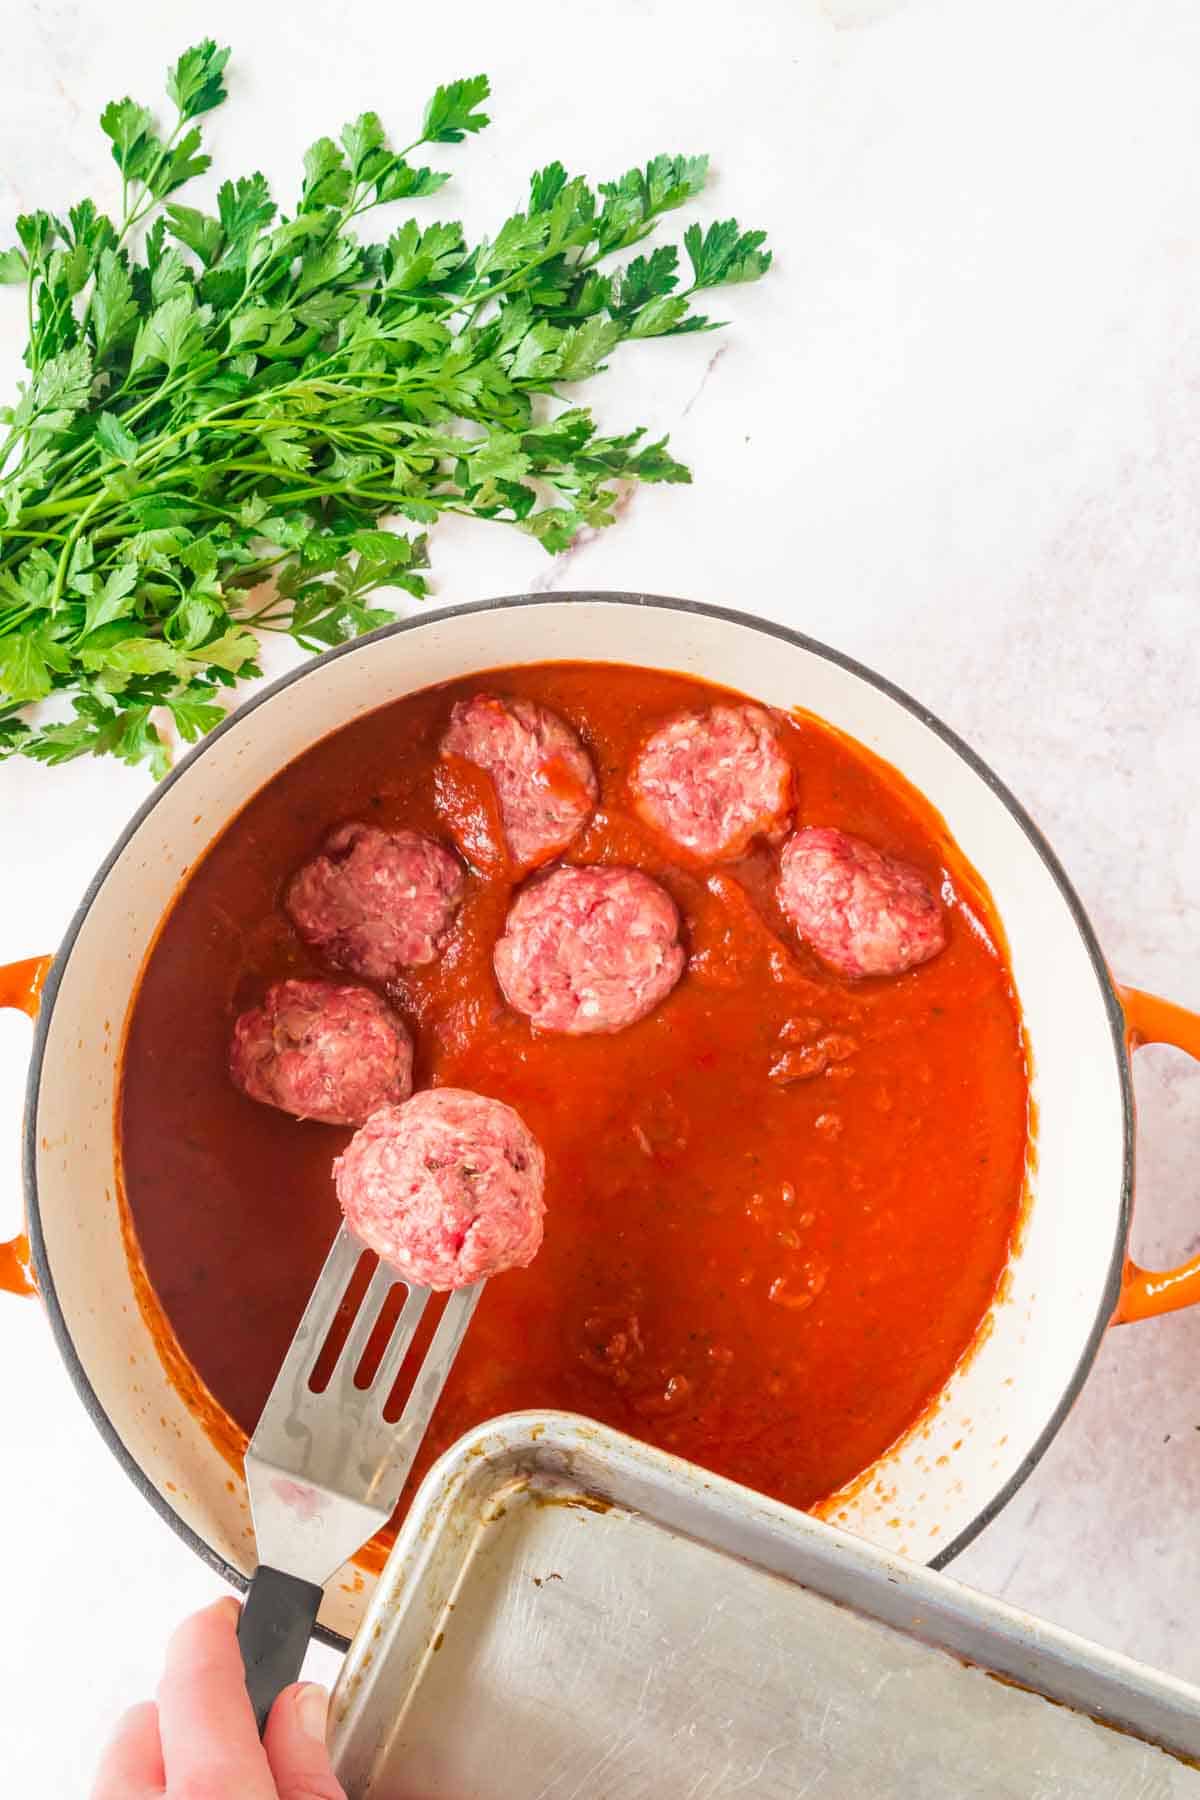 Uncooked meatballs are placed into a pot of marinara sauce.